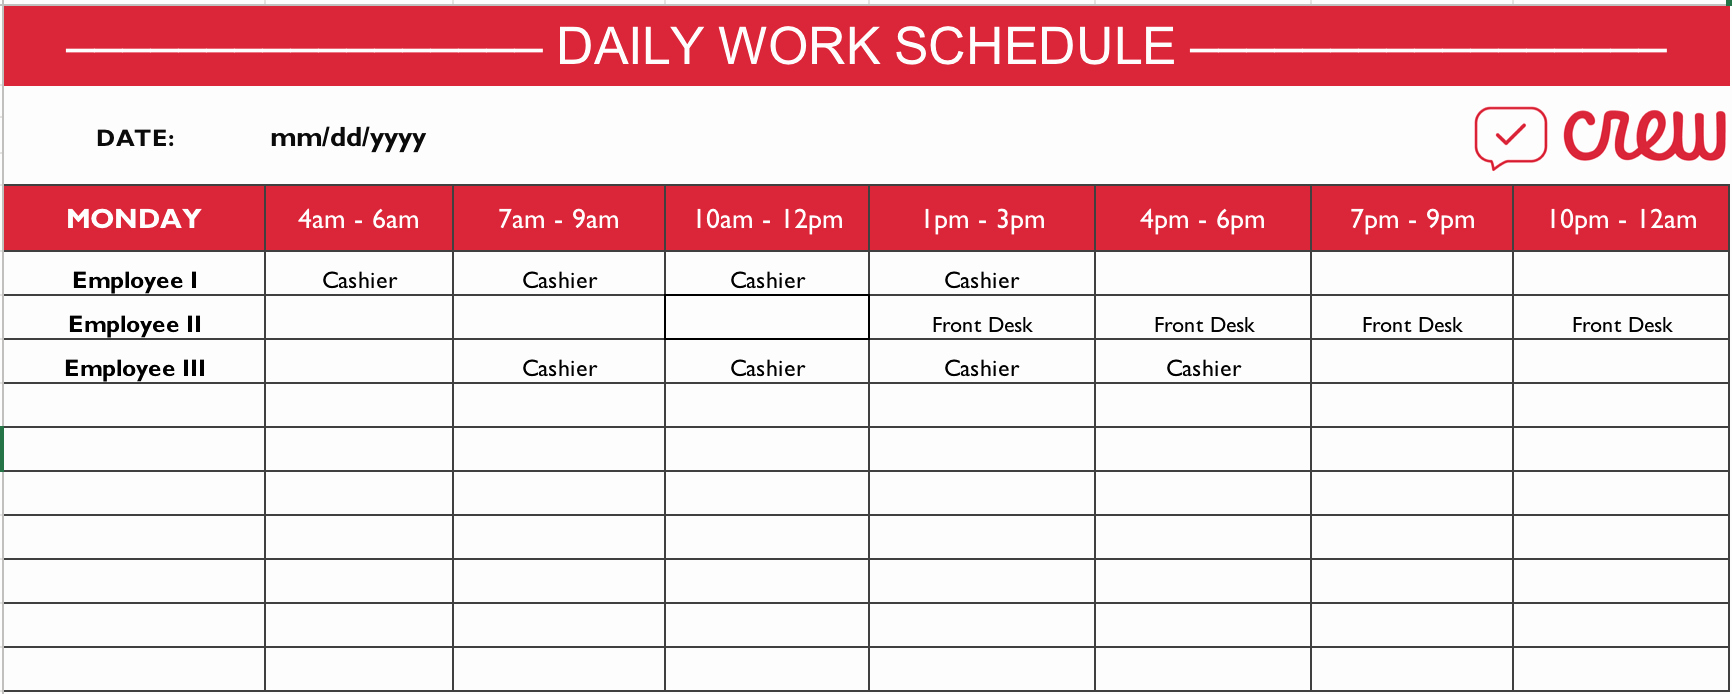 Daily Work Schedule Template Unique Free Daily Work Schedule Template Crew